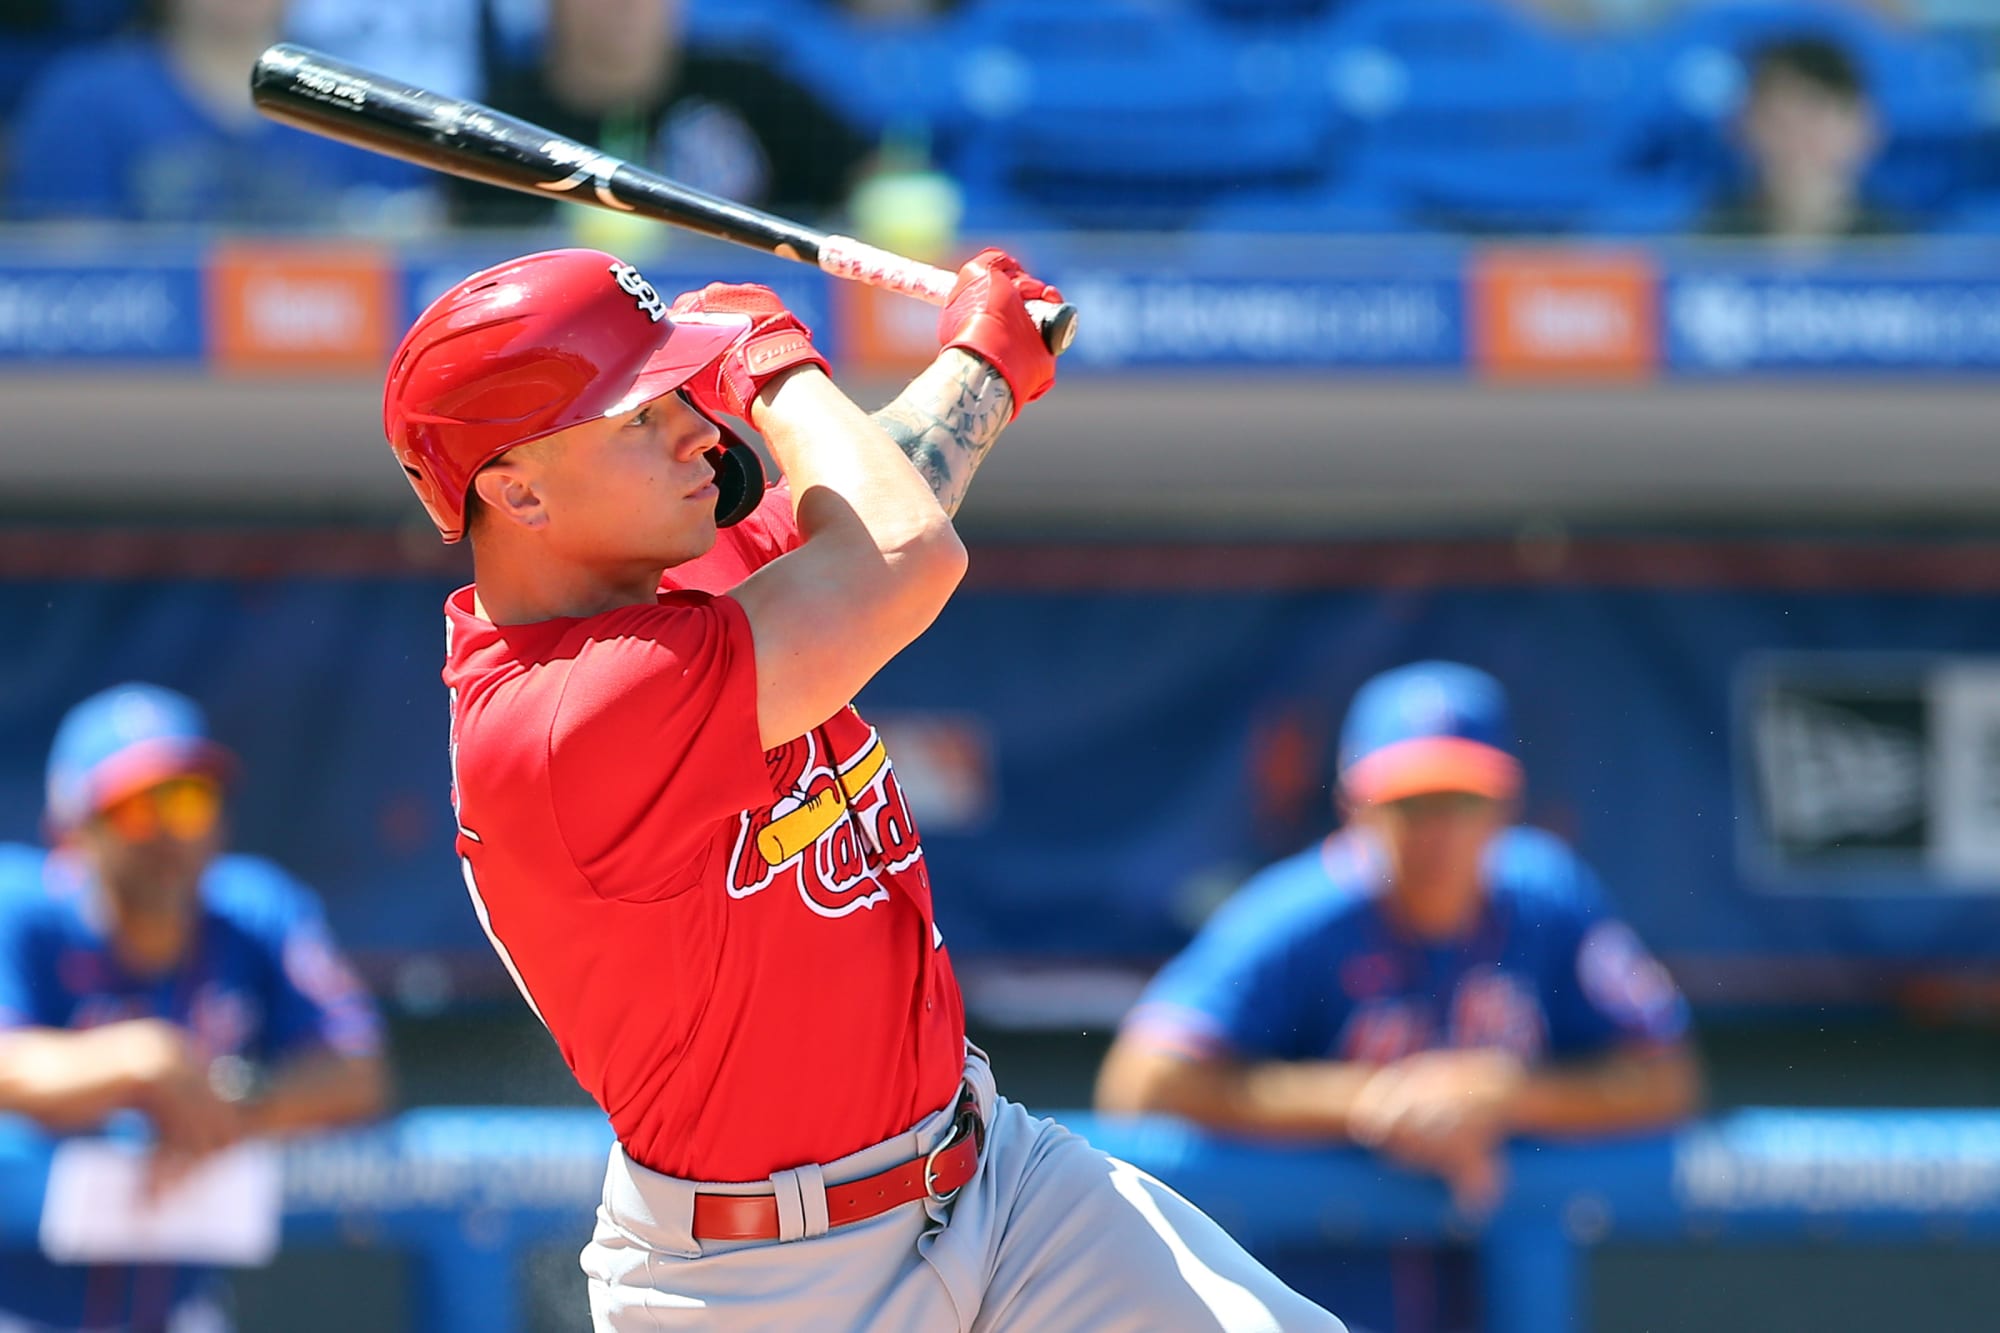 St. Louis Cardinals: Left field is a world of opportunity for the Cards